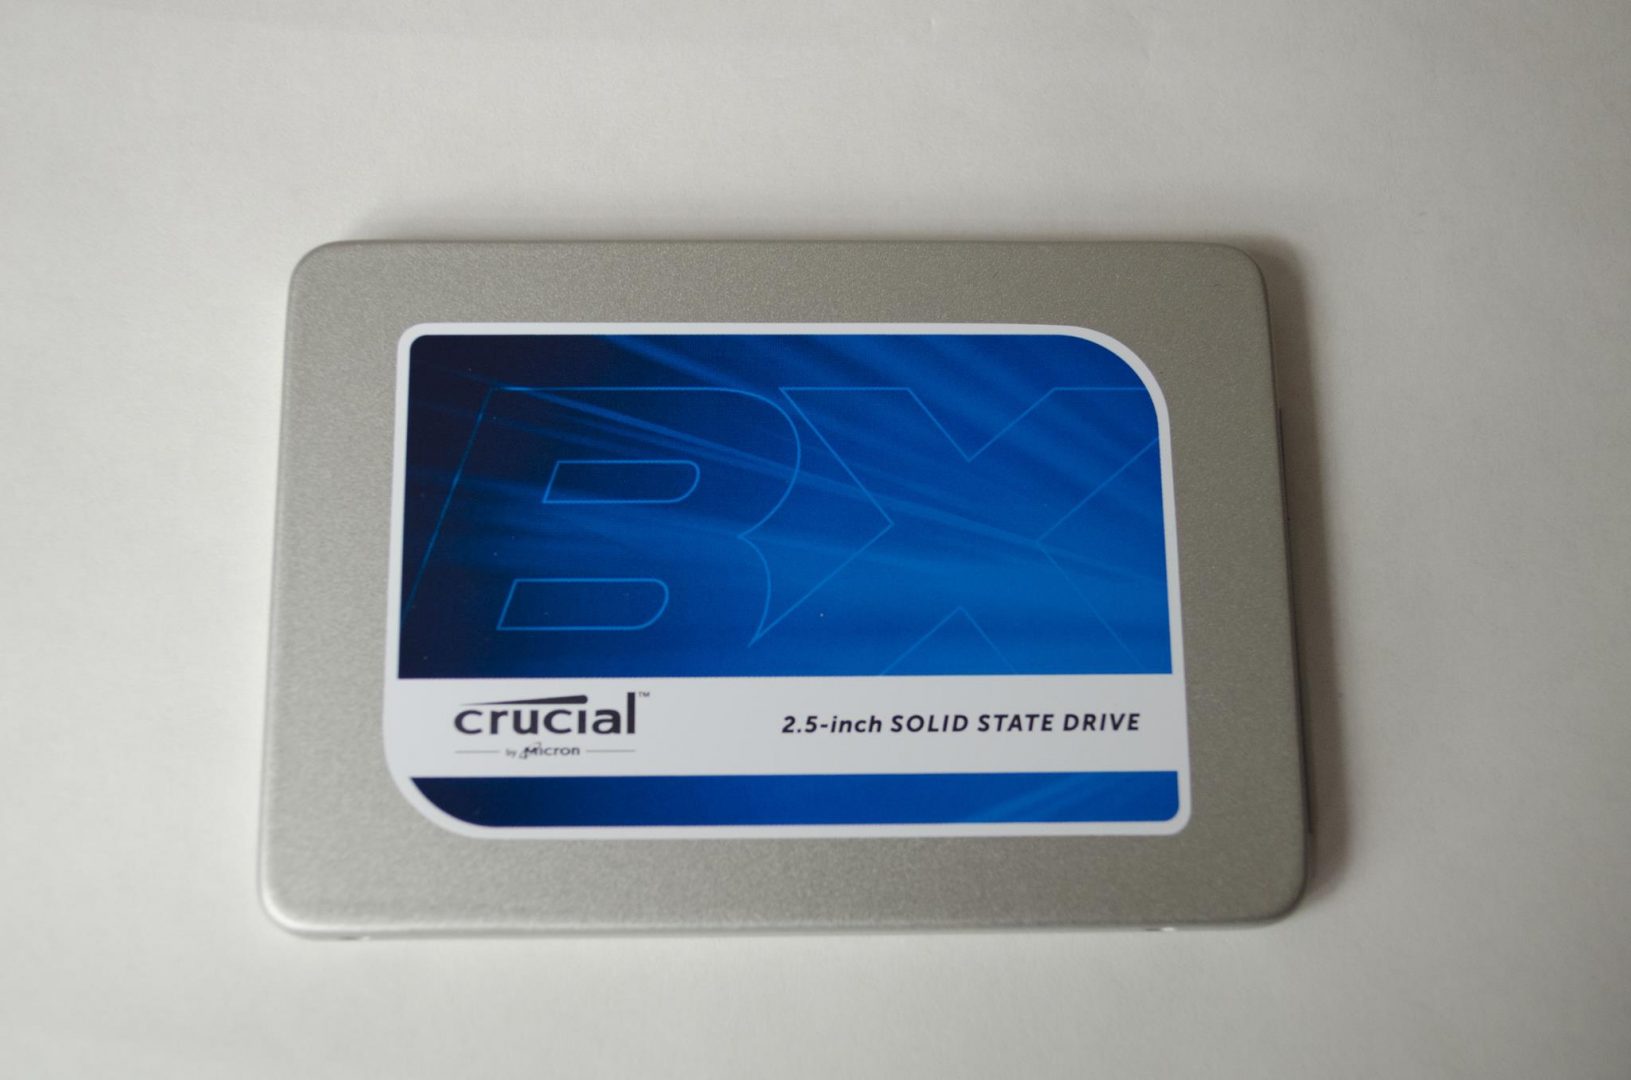 Crucial BX200 480GB SSD Review